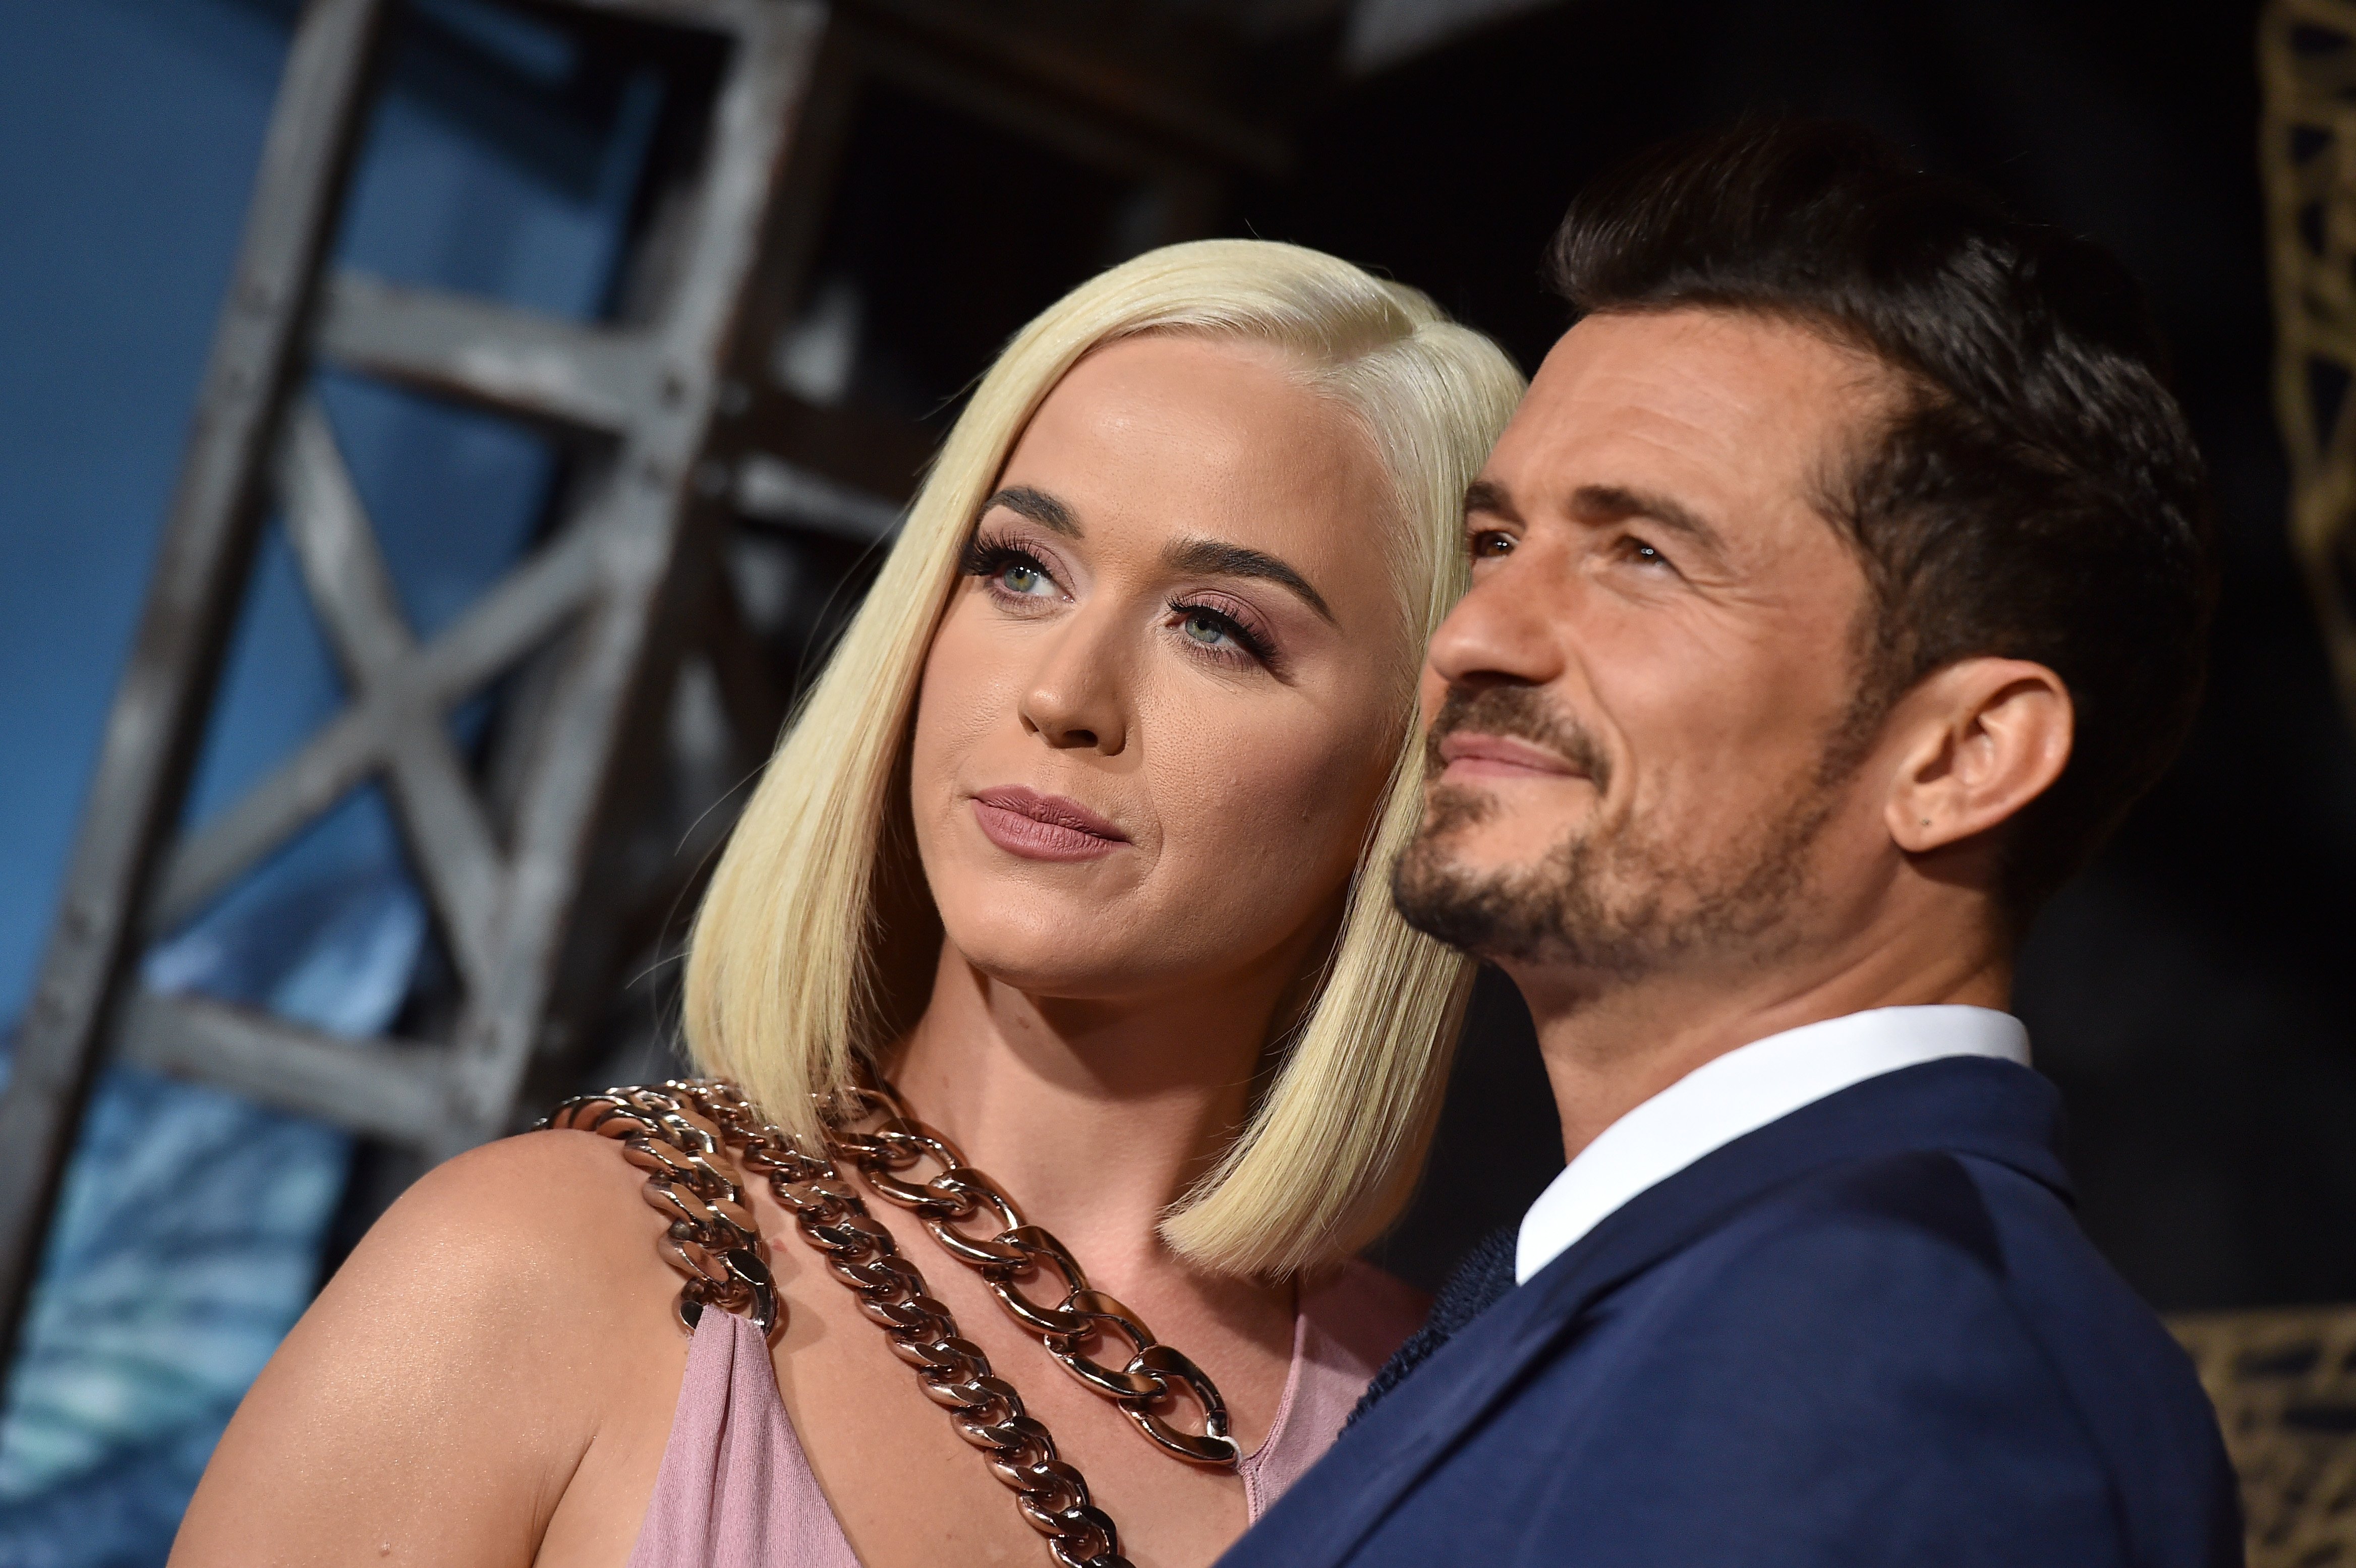 Katy Perry and Orlando Bloom attend the LA Premiere of Amazon's "Carnival Row" on August 21, 2019, in Hollywood, California. | Source: Getty Images.